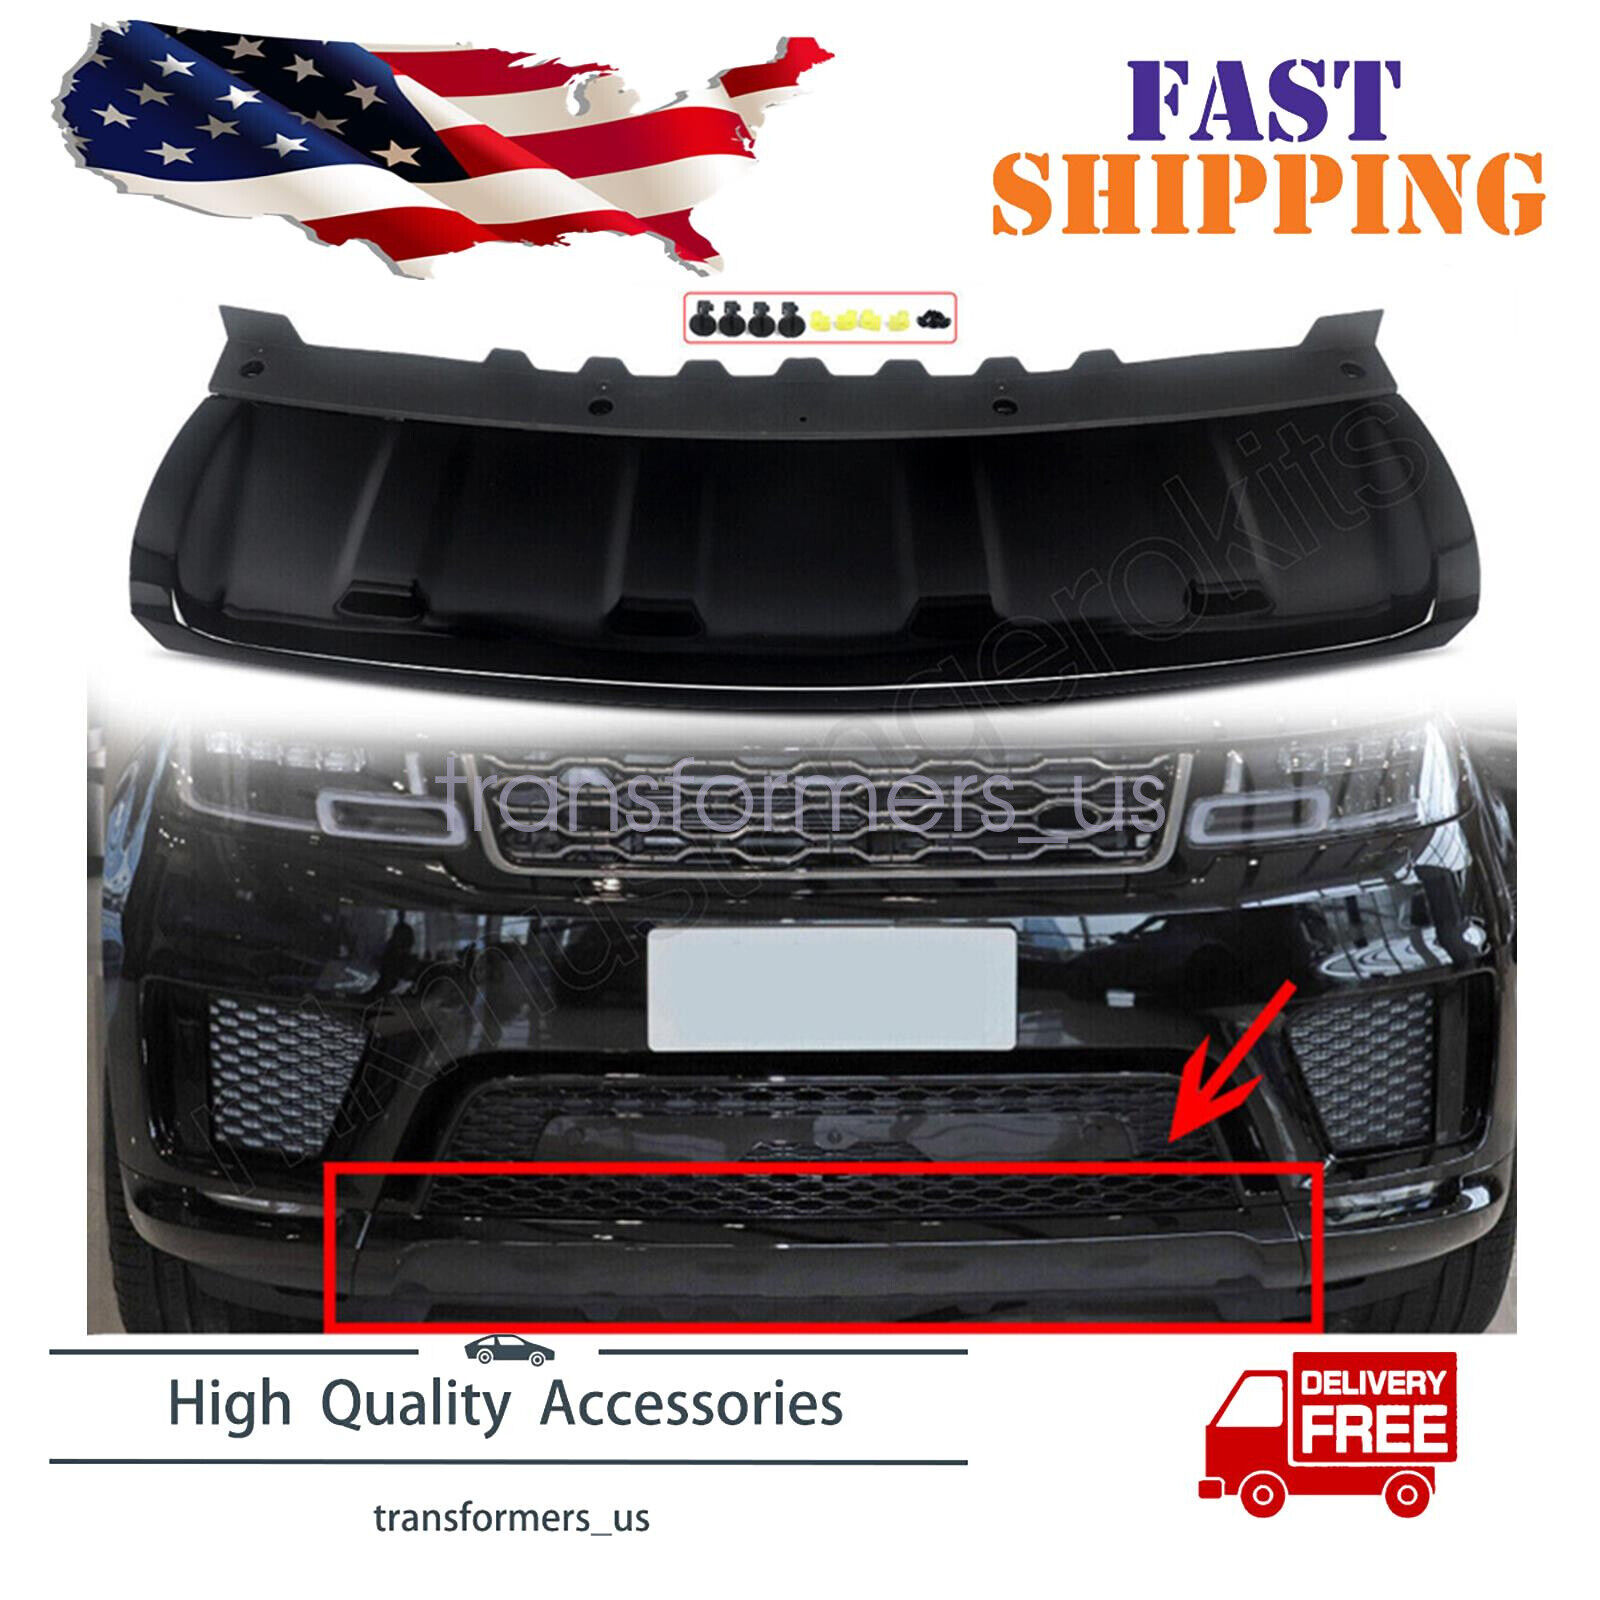 Towing Eye Front Bumper Plate Cover For Land Rover Range Rover Sport 2018-2022